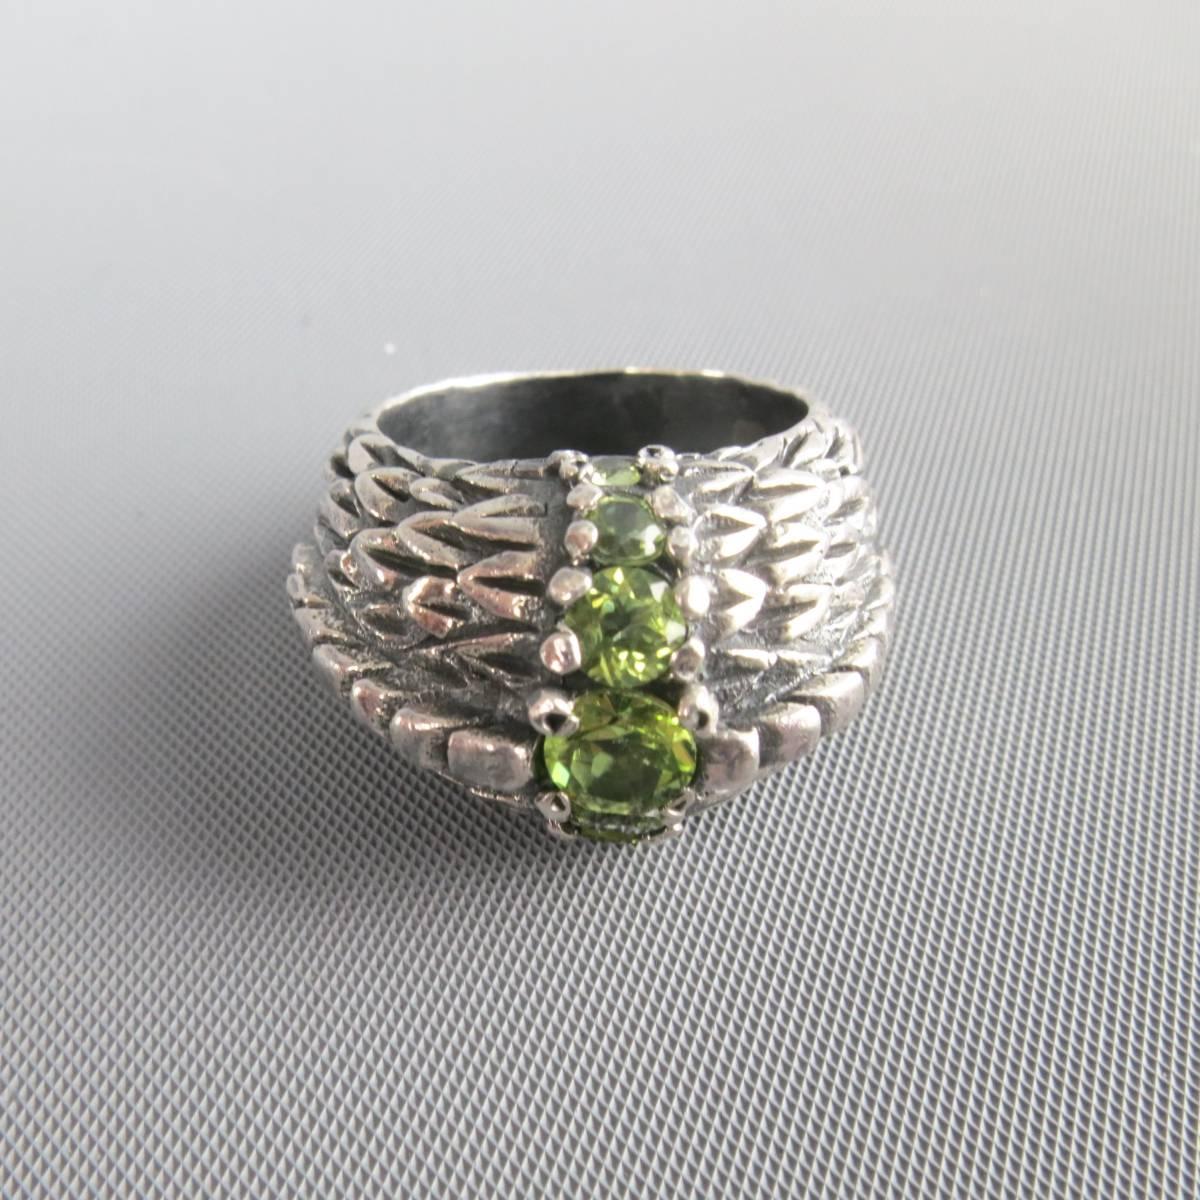 Women's Vintage Size 7.5 Engraved Silver Sterling Silver Green Gem Stone Ring